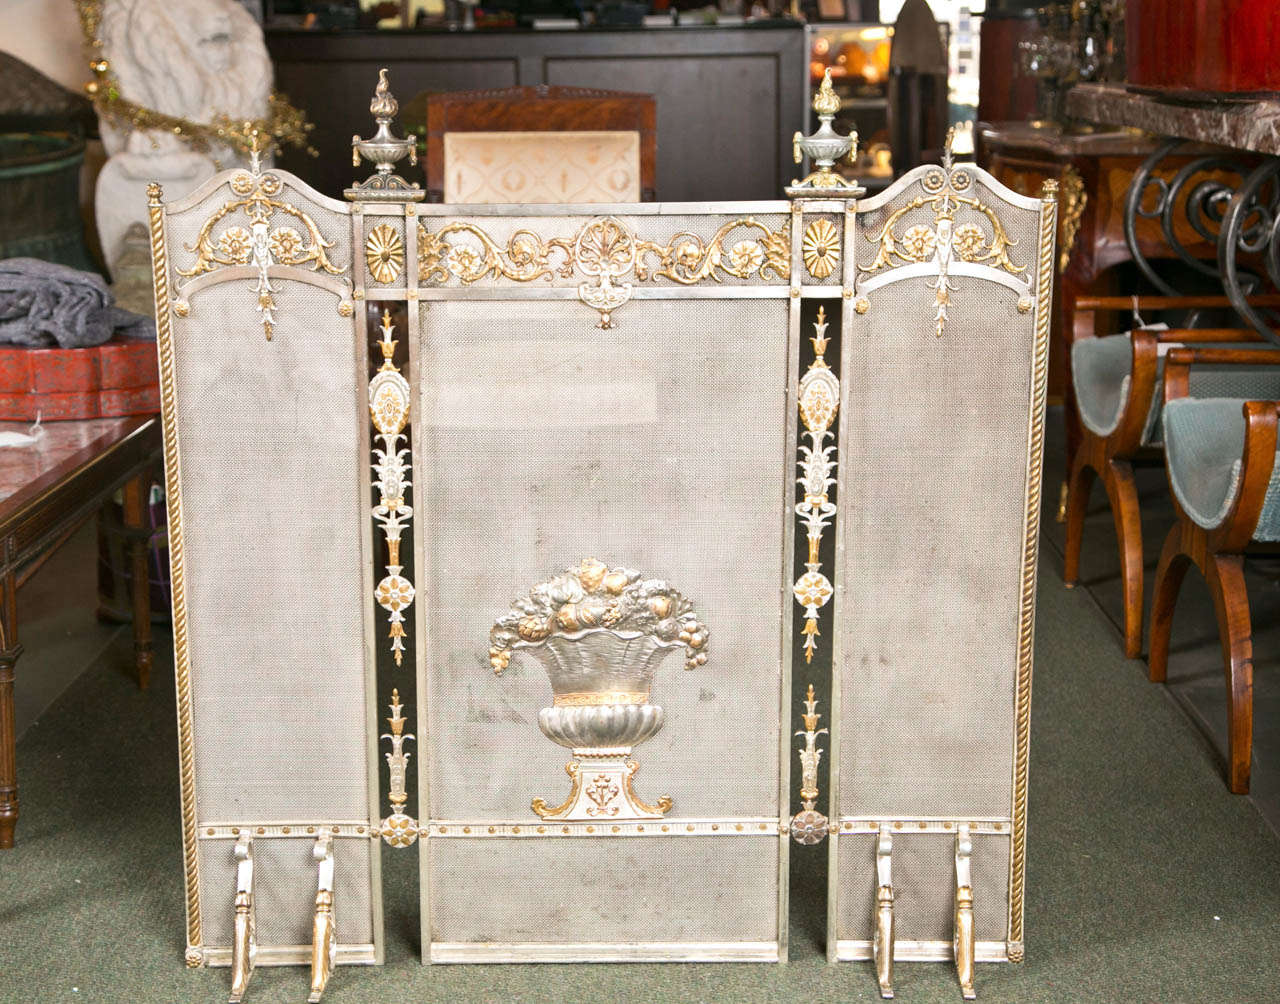 A fabulous silver and dore bronze Edwardian firescreen in the classical manner.